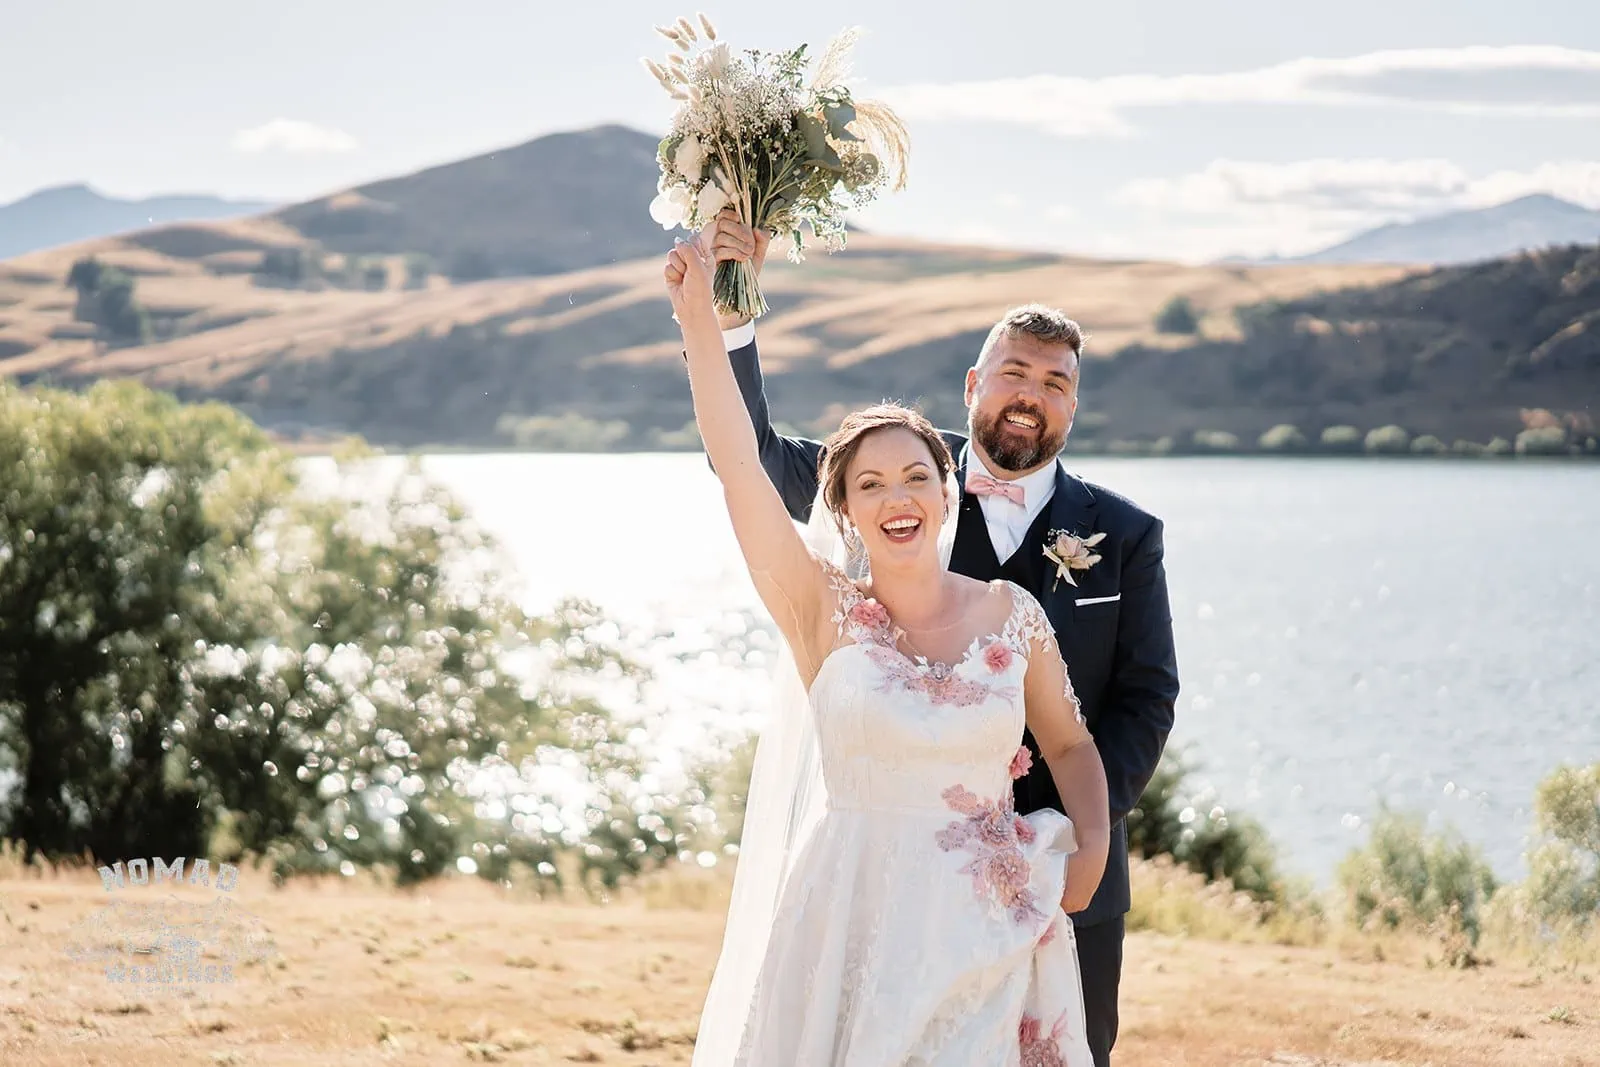 Queenstown New Zealand Elopement Wedding Photographer - A bride and groom holding bouquets in front of a lake - QUEENSTOWN SUMMER WEDDING